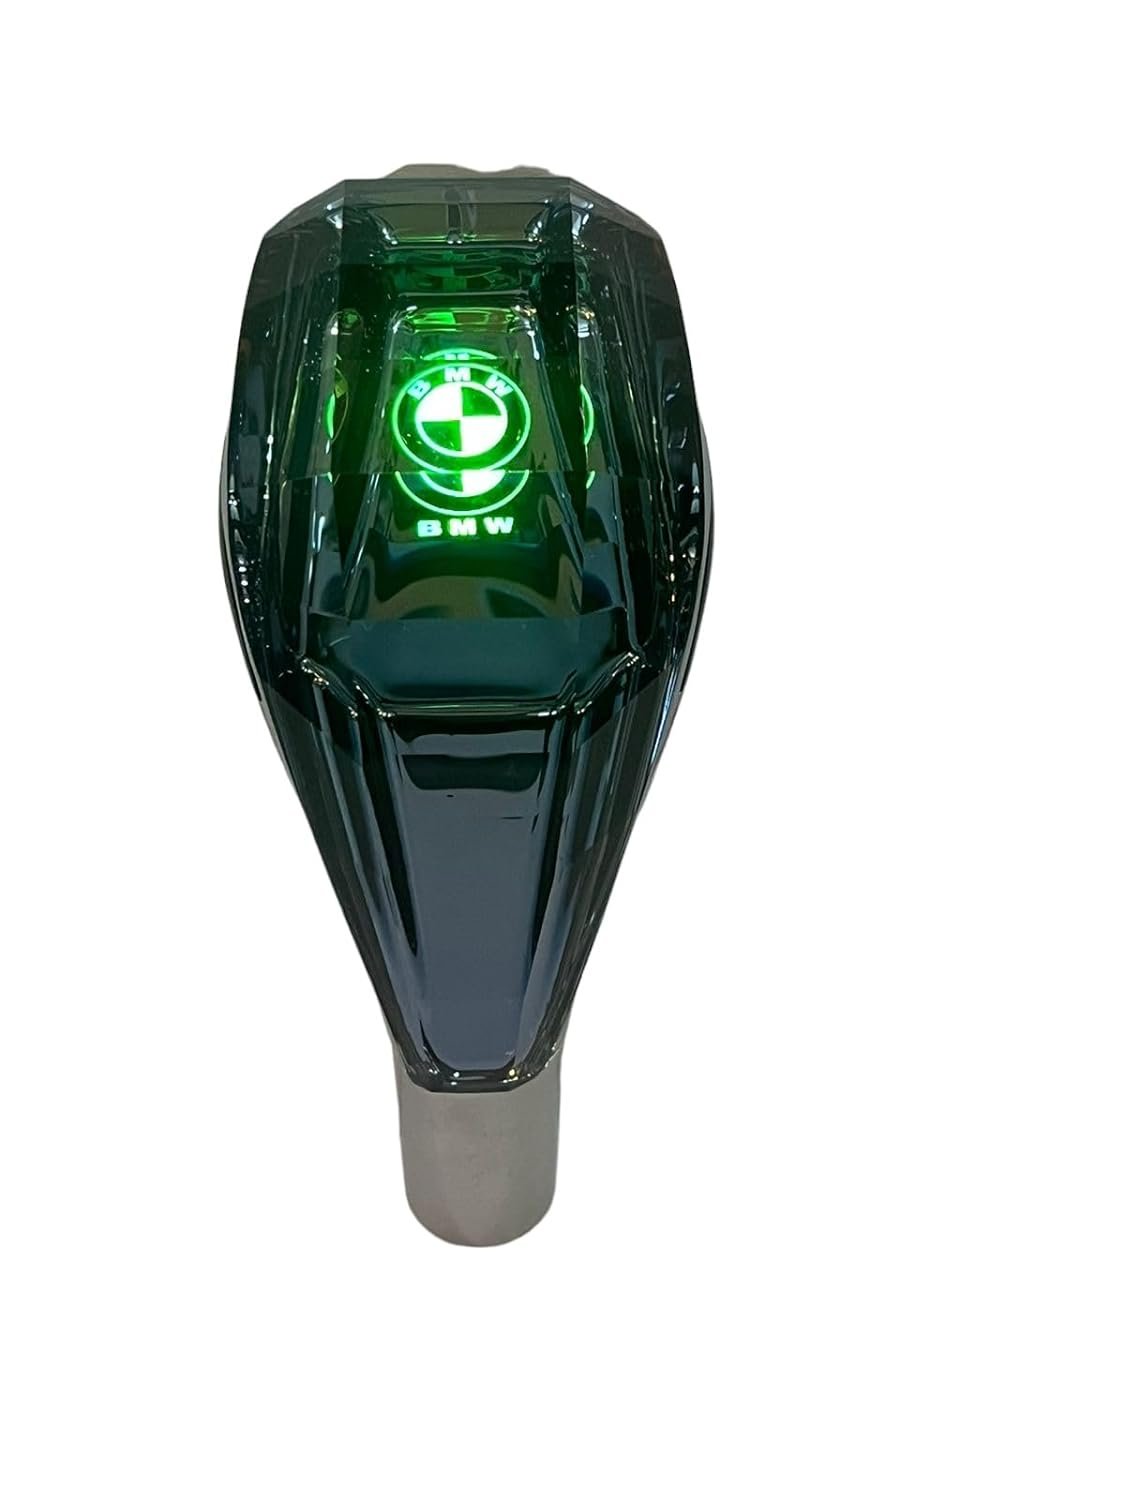 Crystal Shift knob Touch Activated Ultra LED Light Illuminated Gear Shift Knob, Fits For Most Cars with Button-Less Operated Shifter Fit For B-MW Cars Image 